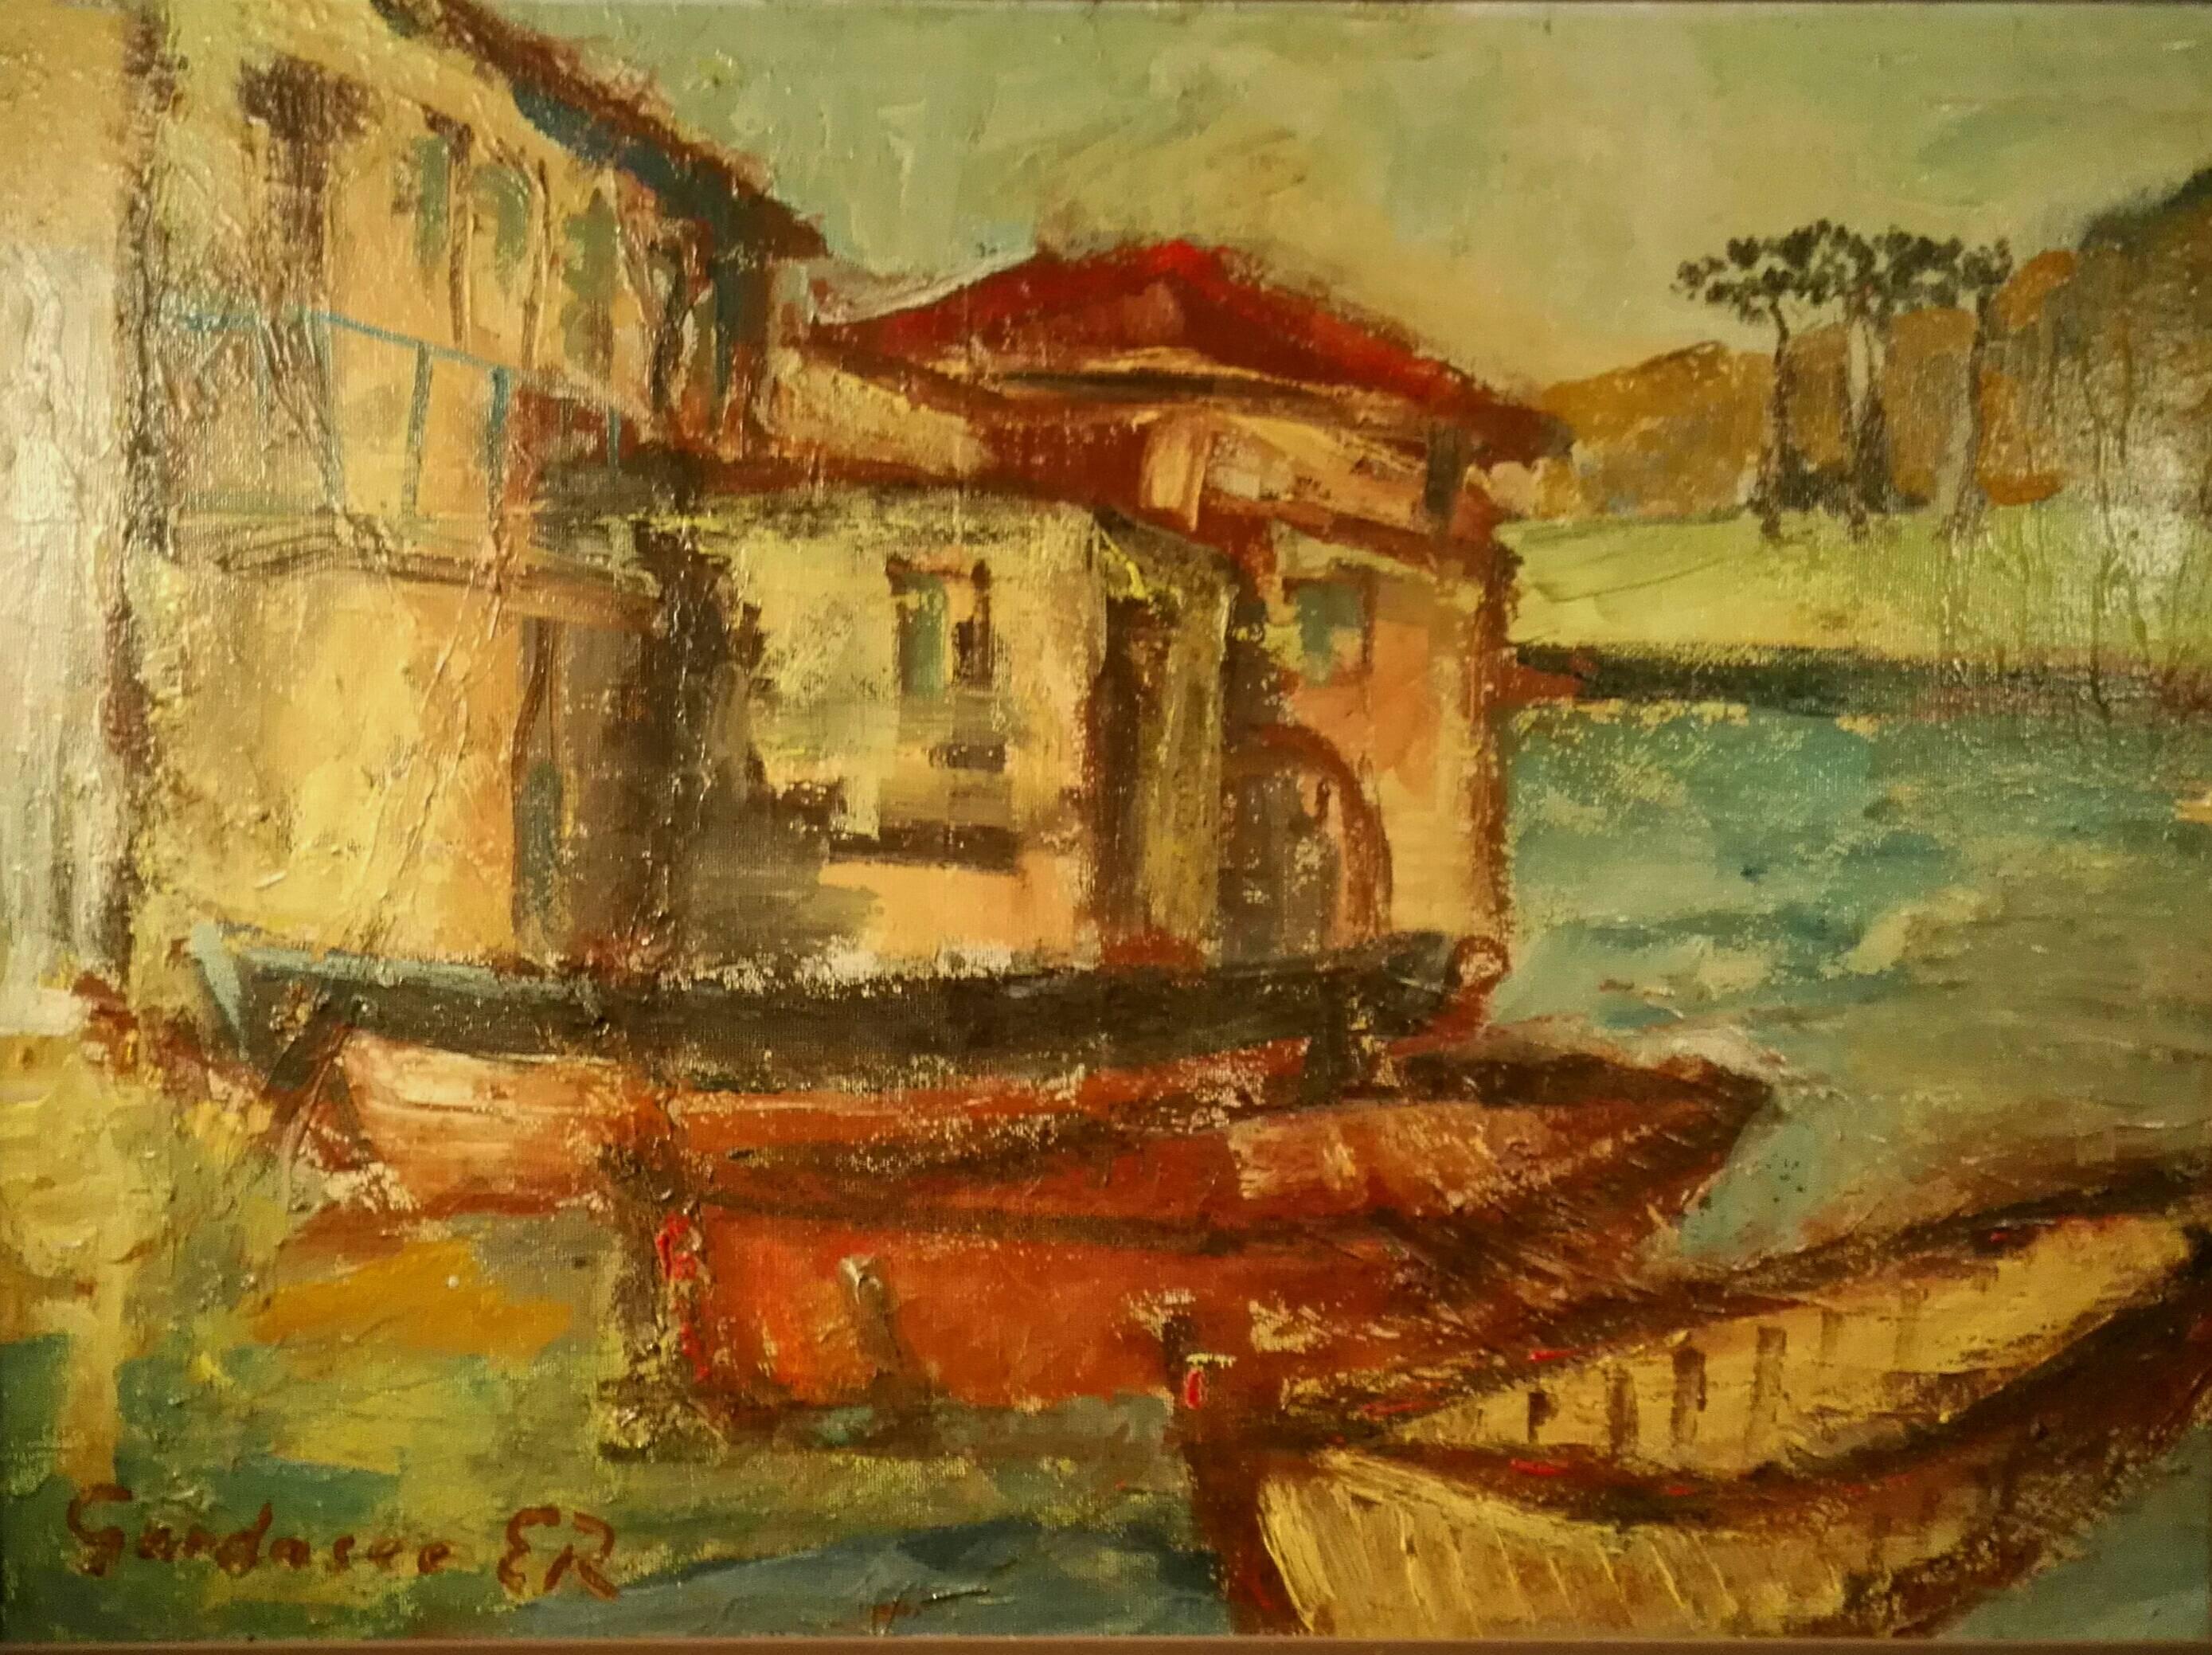 This oil painting was created in wonderful Mediterranean colors in thick cardboard. A rare nur appealing perspective of Lake Garda with fishing boats in the foreground! There is a certain warmth and depth in the rather modern and abstract way of